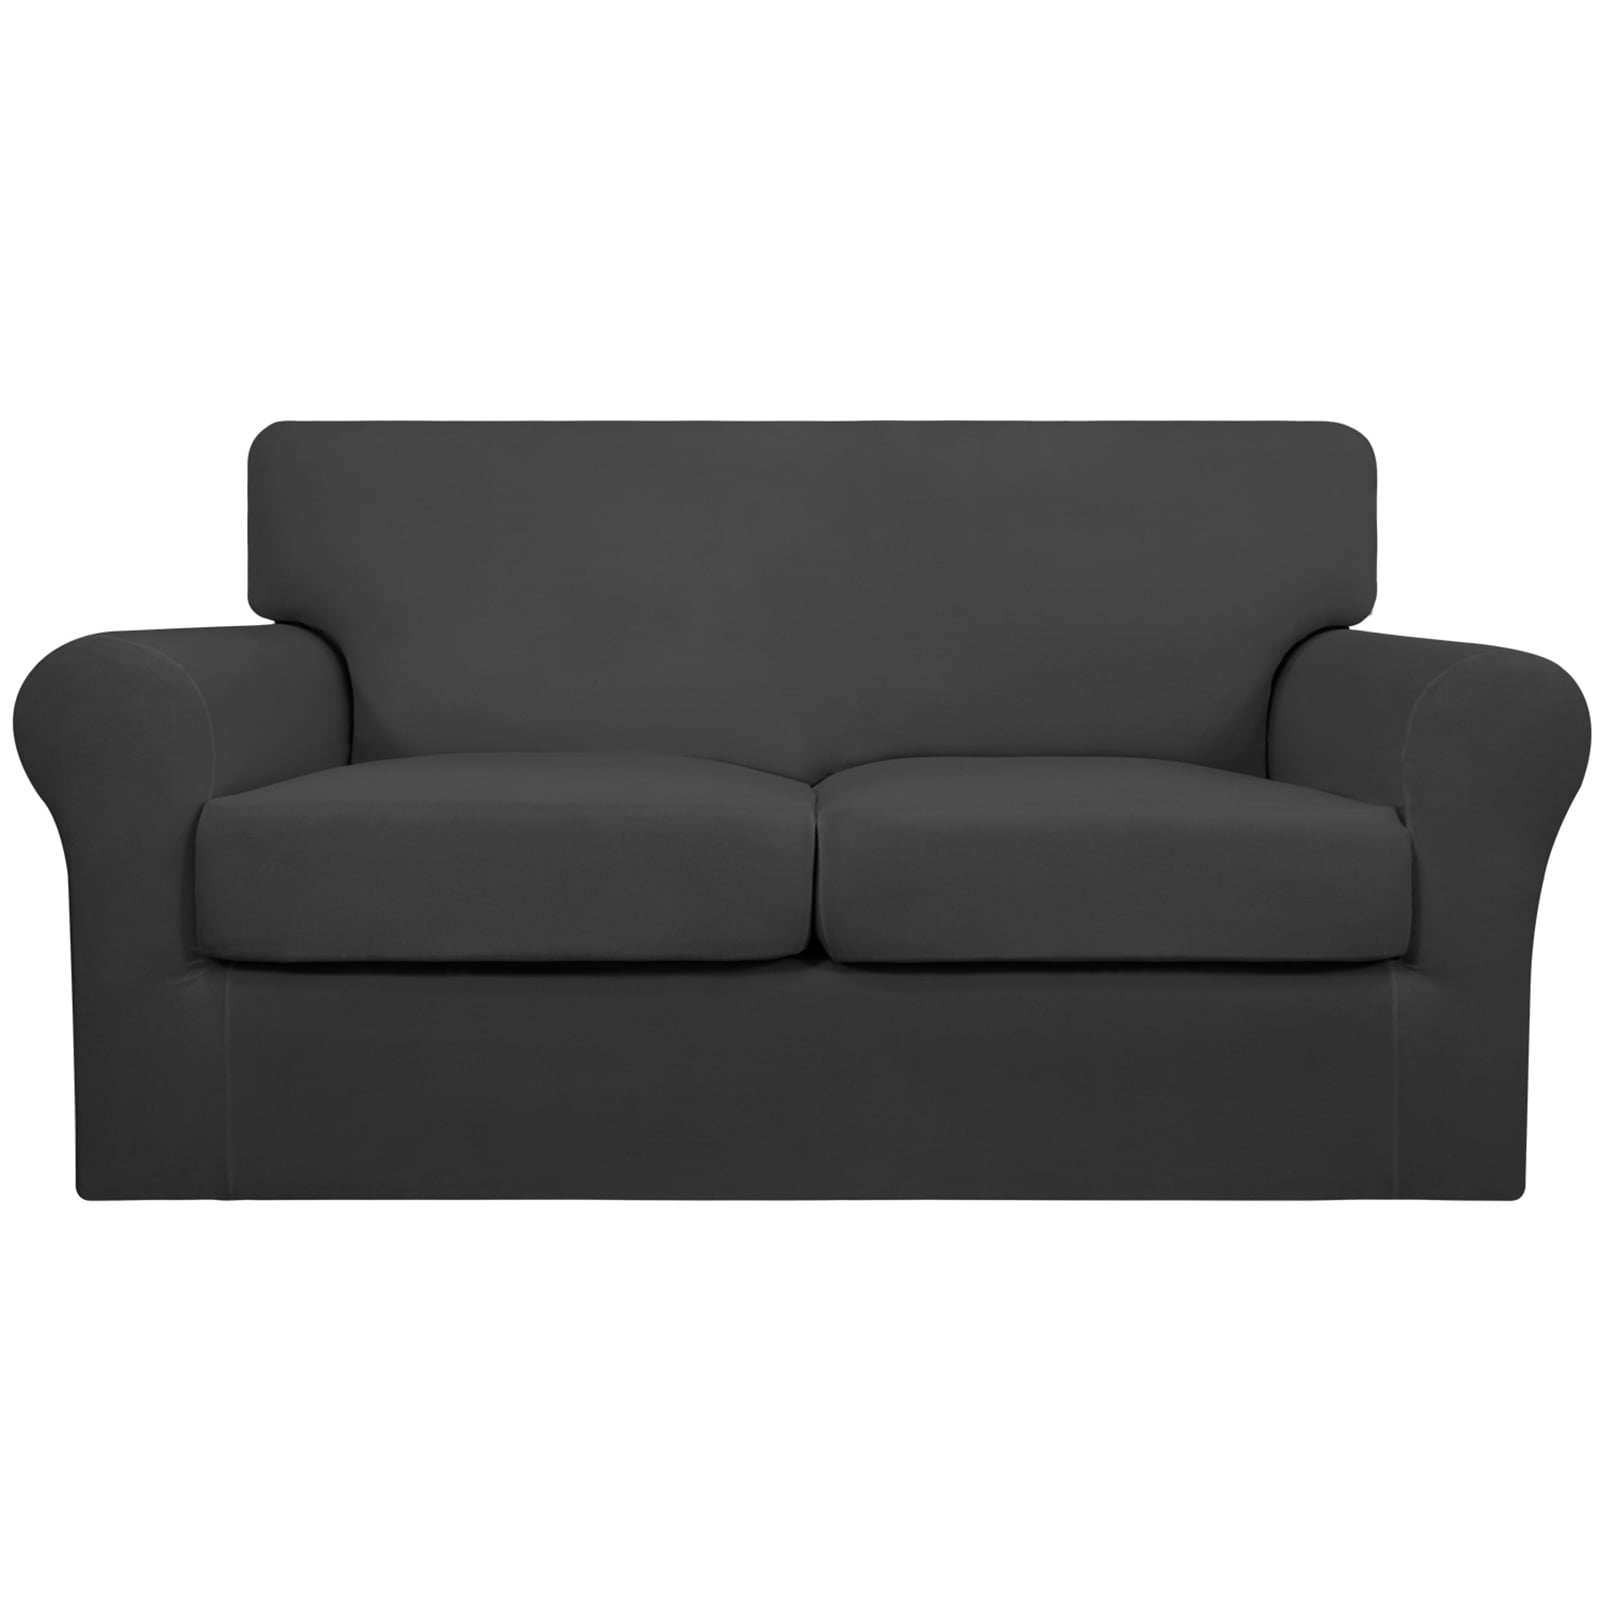 NEW Details about   Perfect Fit NeverWet 1-Piece Loveseat Slipcover in Grey 